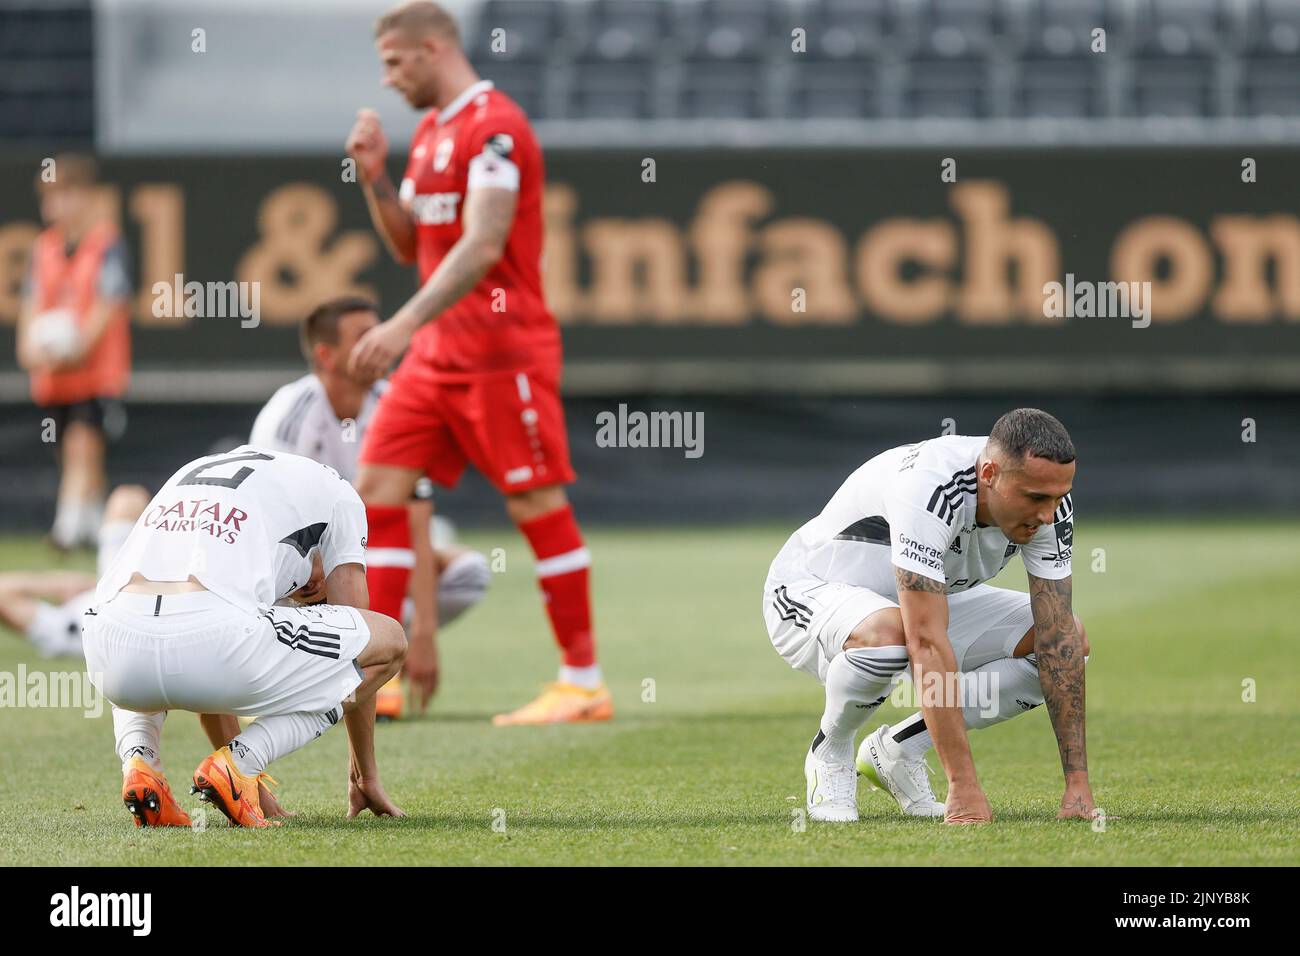 Eupen's players look dejected after a soccer match between KAS Eupen and Royal Antwerp FC RAFC, Sunday 14 August 2022 in Eupen, on day 4 of the 2022-2023 'Jupiler Pro League' first division of the Belgian championship. BELGA PHOTO BRUNO FAHY Stock Photo